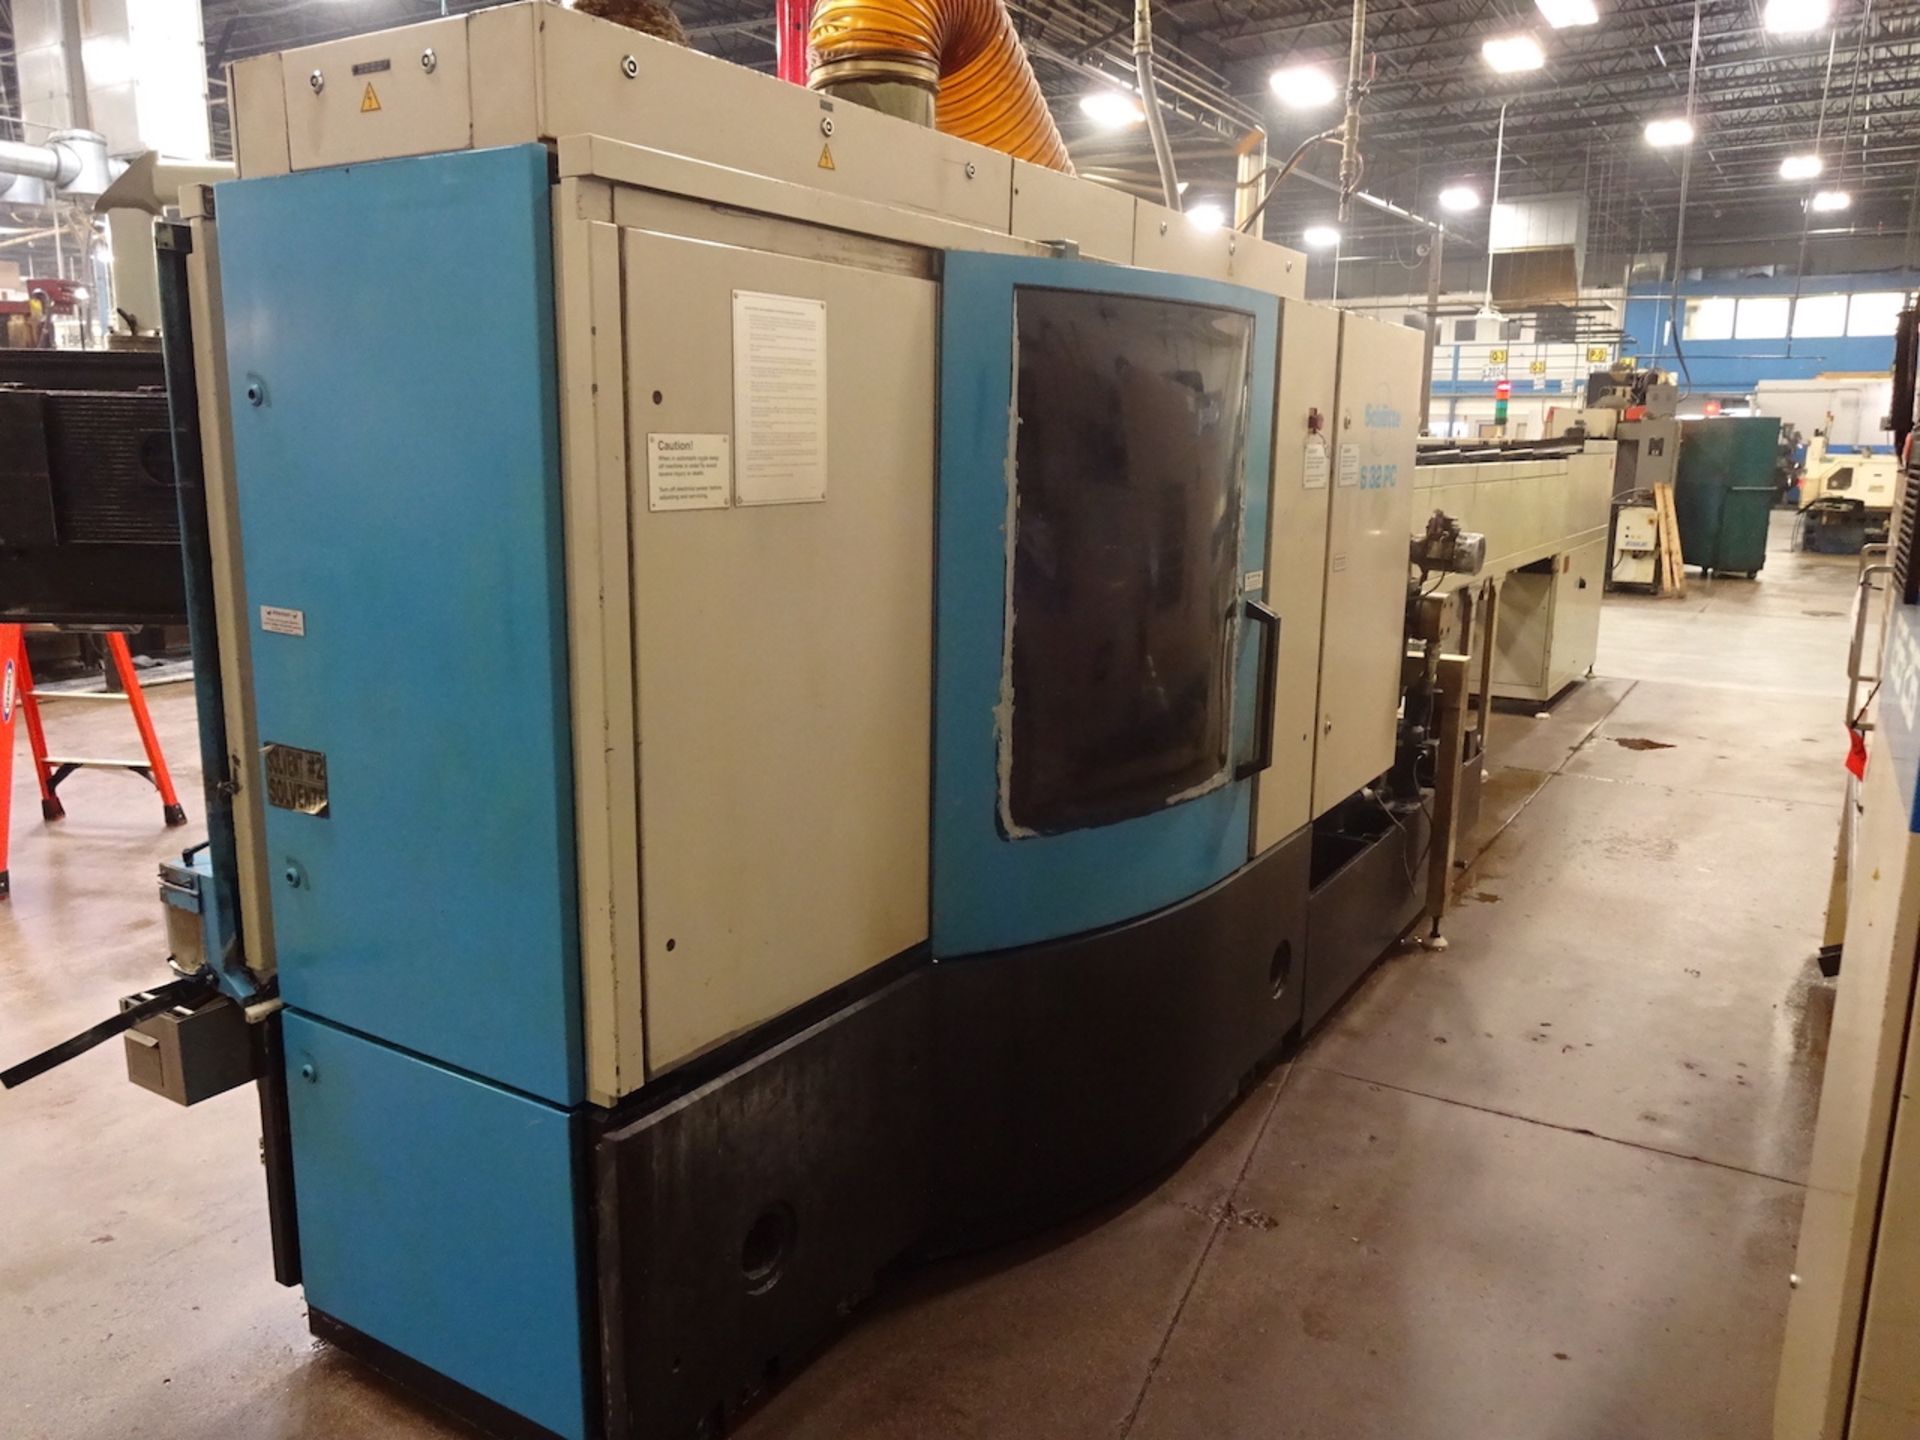 2001 SCHUTTE MODEL S32PC 6-SPINDLE AUTOMATIC SCREW MACHINE, S/N 09-09 (PC C3200), SERIES 09 NO.09, - Image 6 of 11